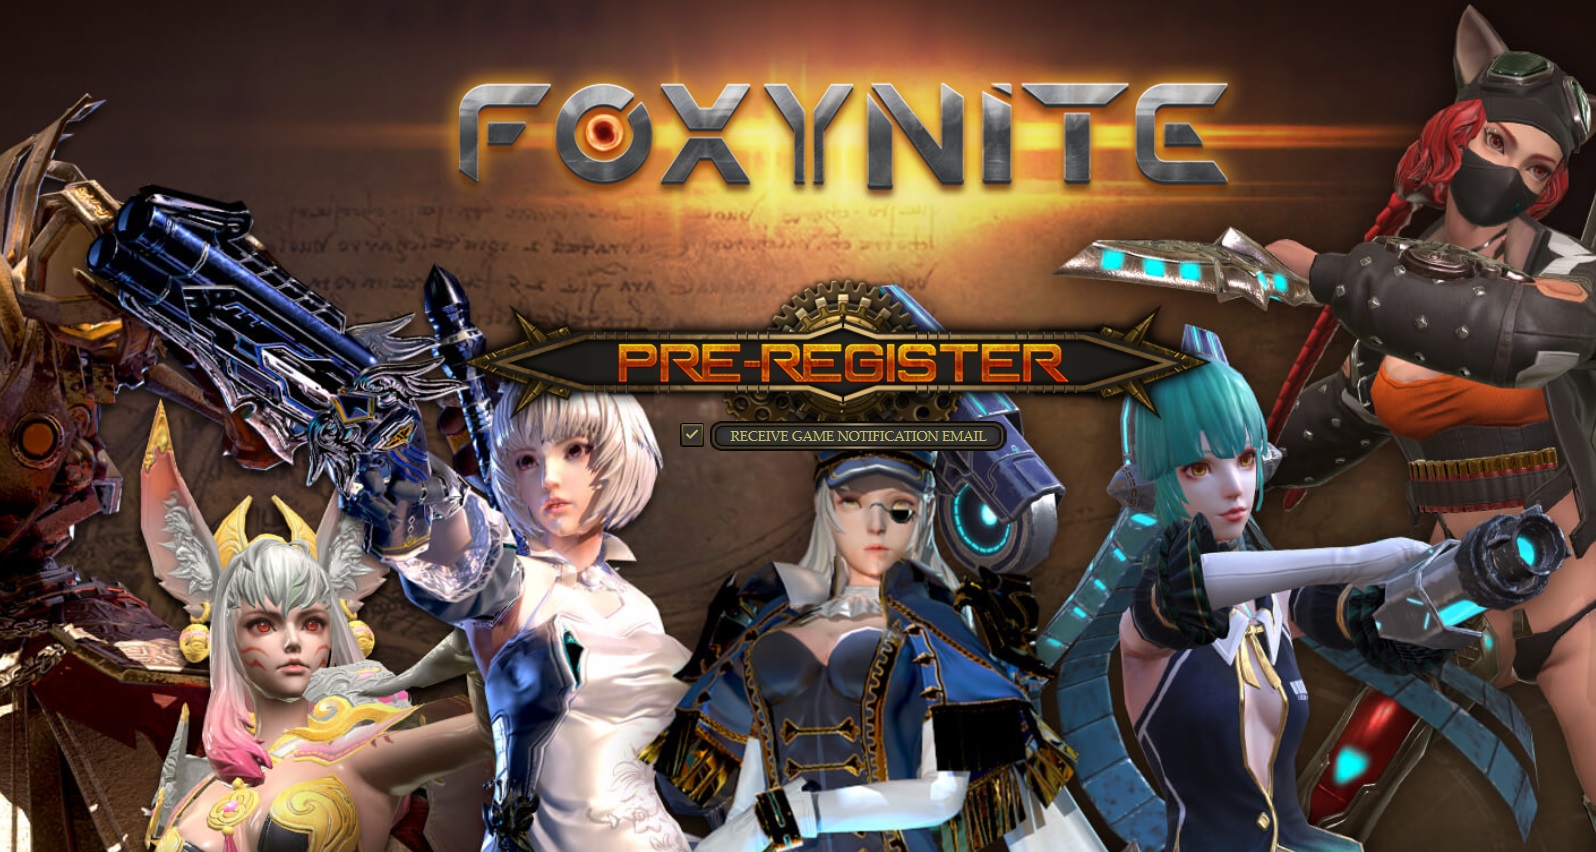 1596px x 852px - Free 3D Hentai RPG Foxynite Opens Pre-Registrations - Hentaireviews